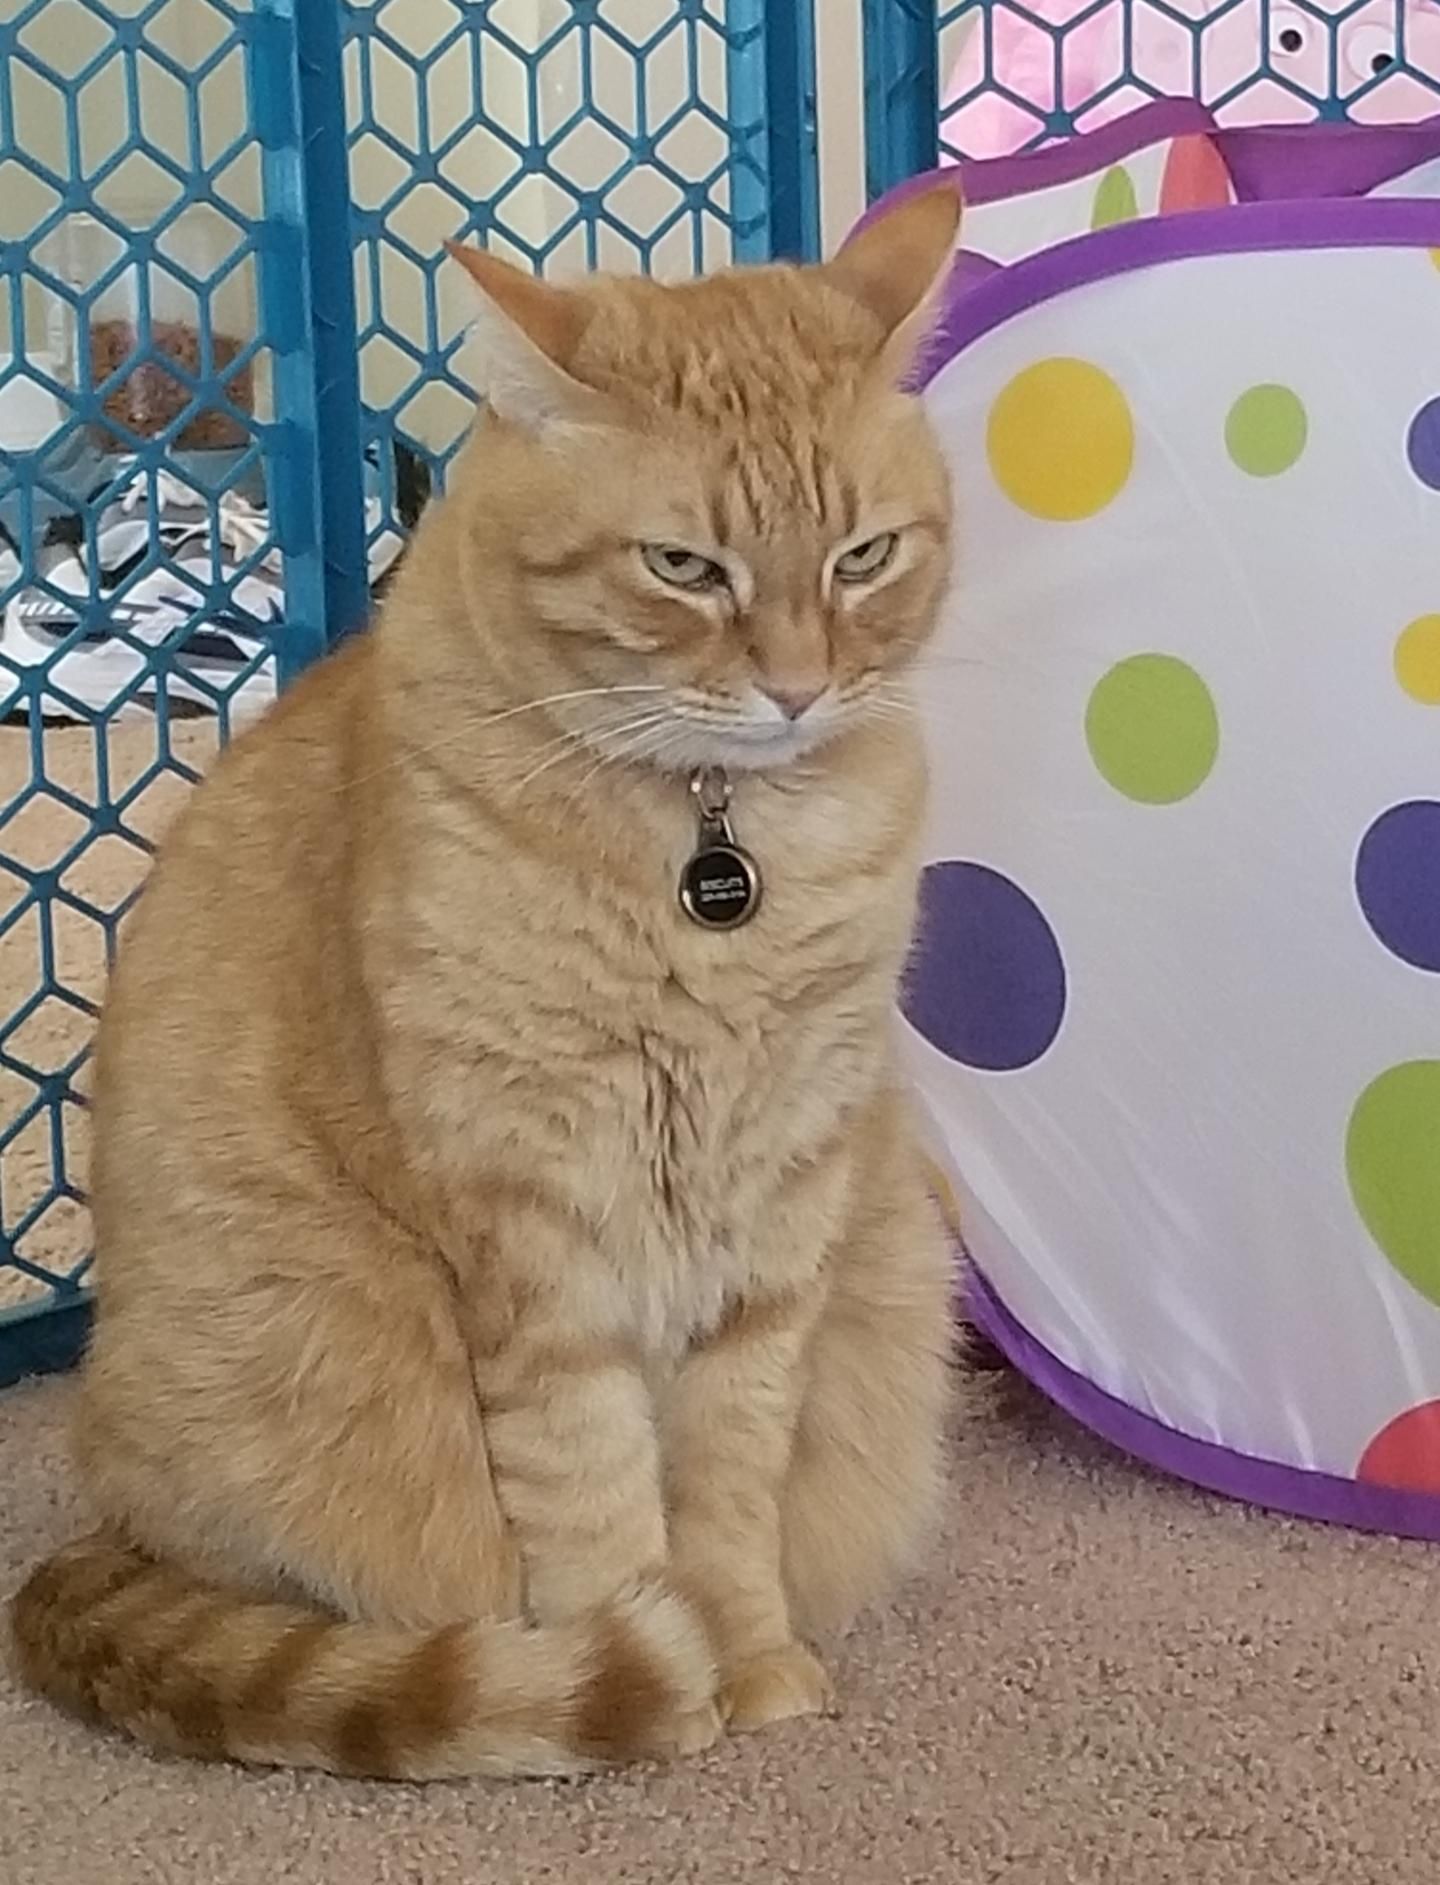 Told my cat not to get in my daughter's play tent. He sat like this for the next 20 minutes.